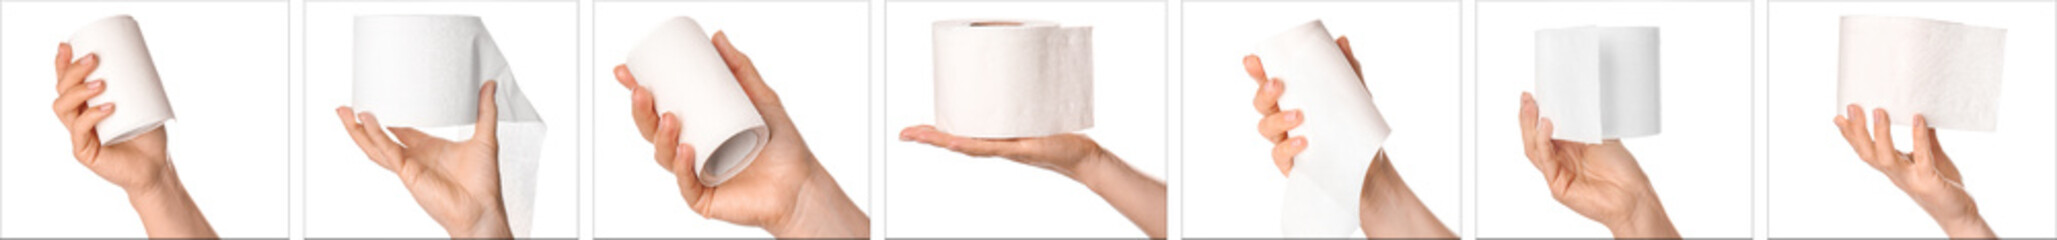 Hands with rolls of toilet paper on white background